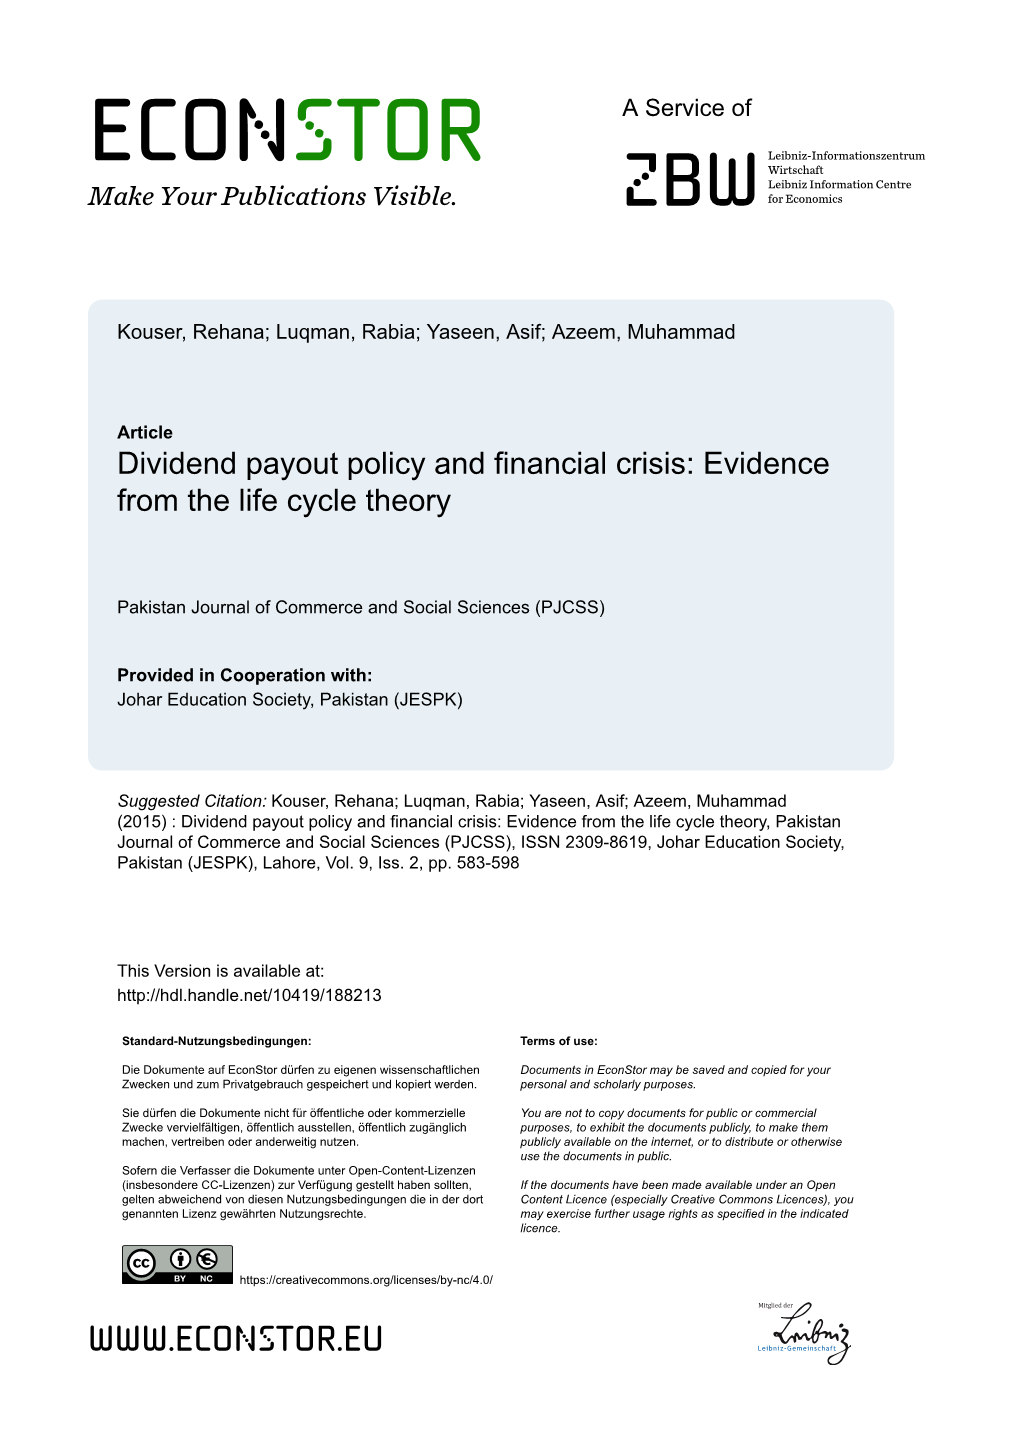 Dividend Payout Policy and Financial Crisis: Evidence from the Life Cycle Theory